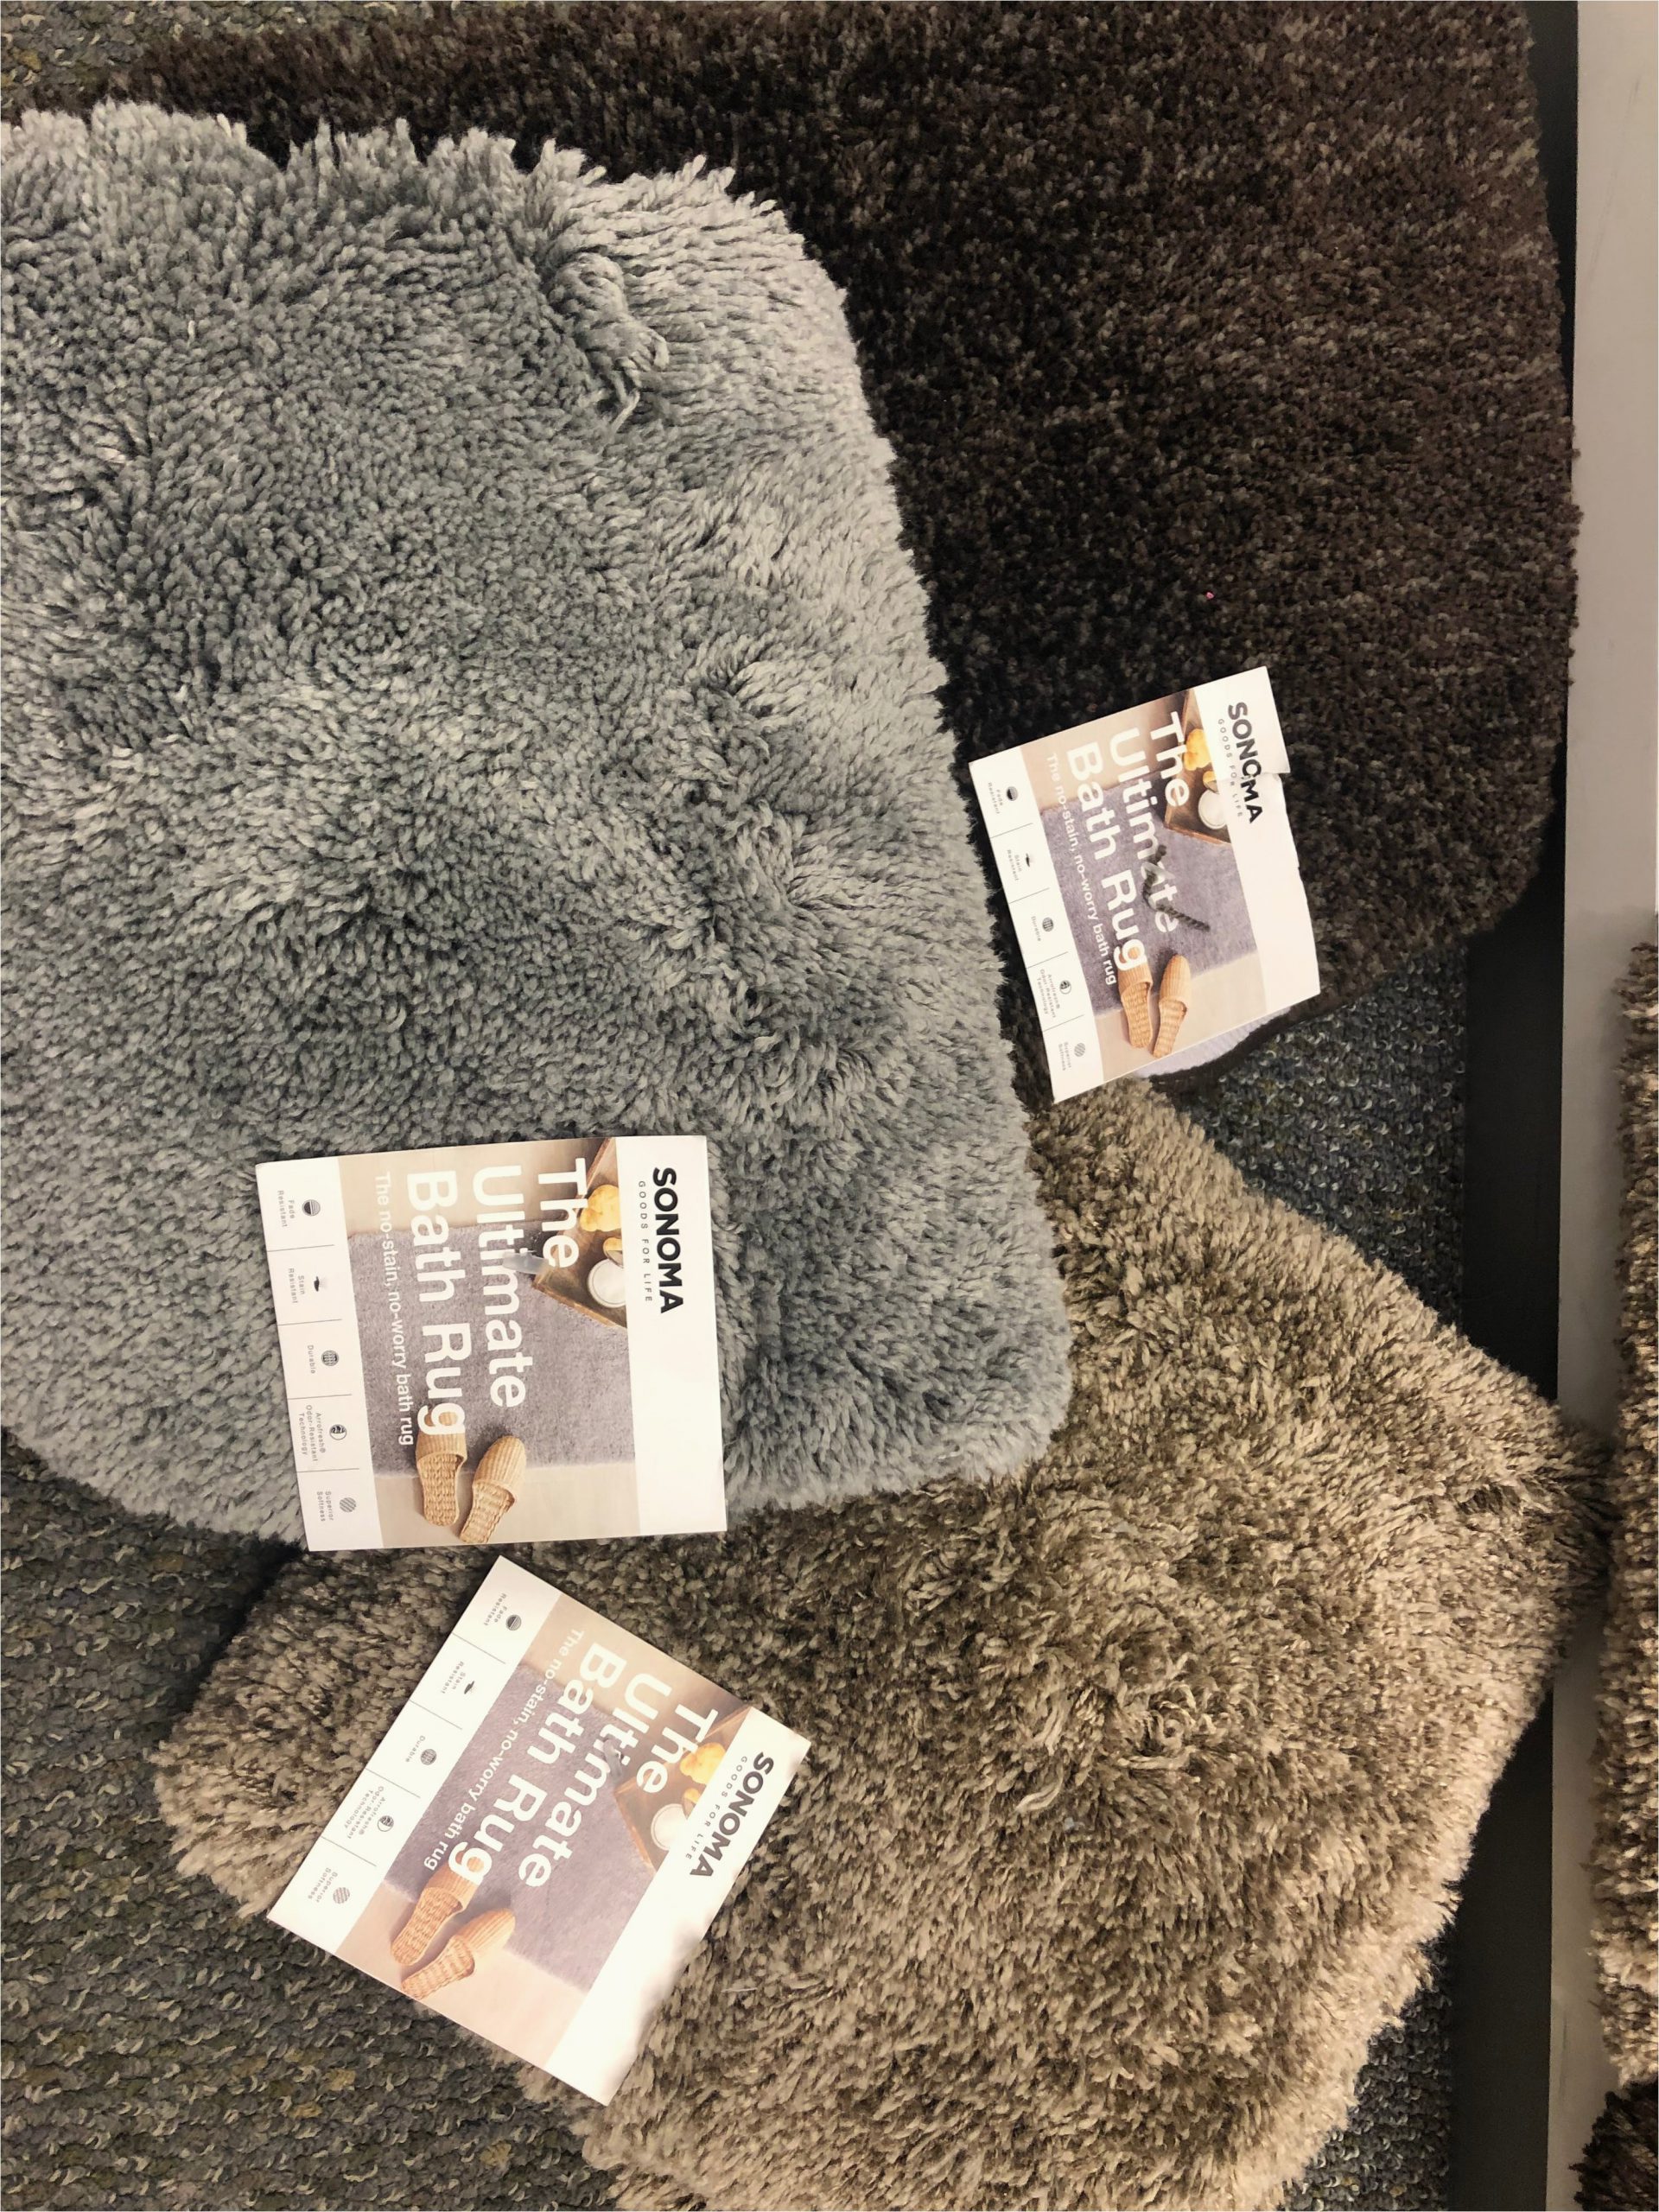 Sonoma Bathroom Rugs at Kohl S $8 sonoma Ultimate Bath Rugs at Kohl S the Krazy Coupon Lady